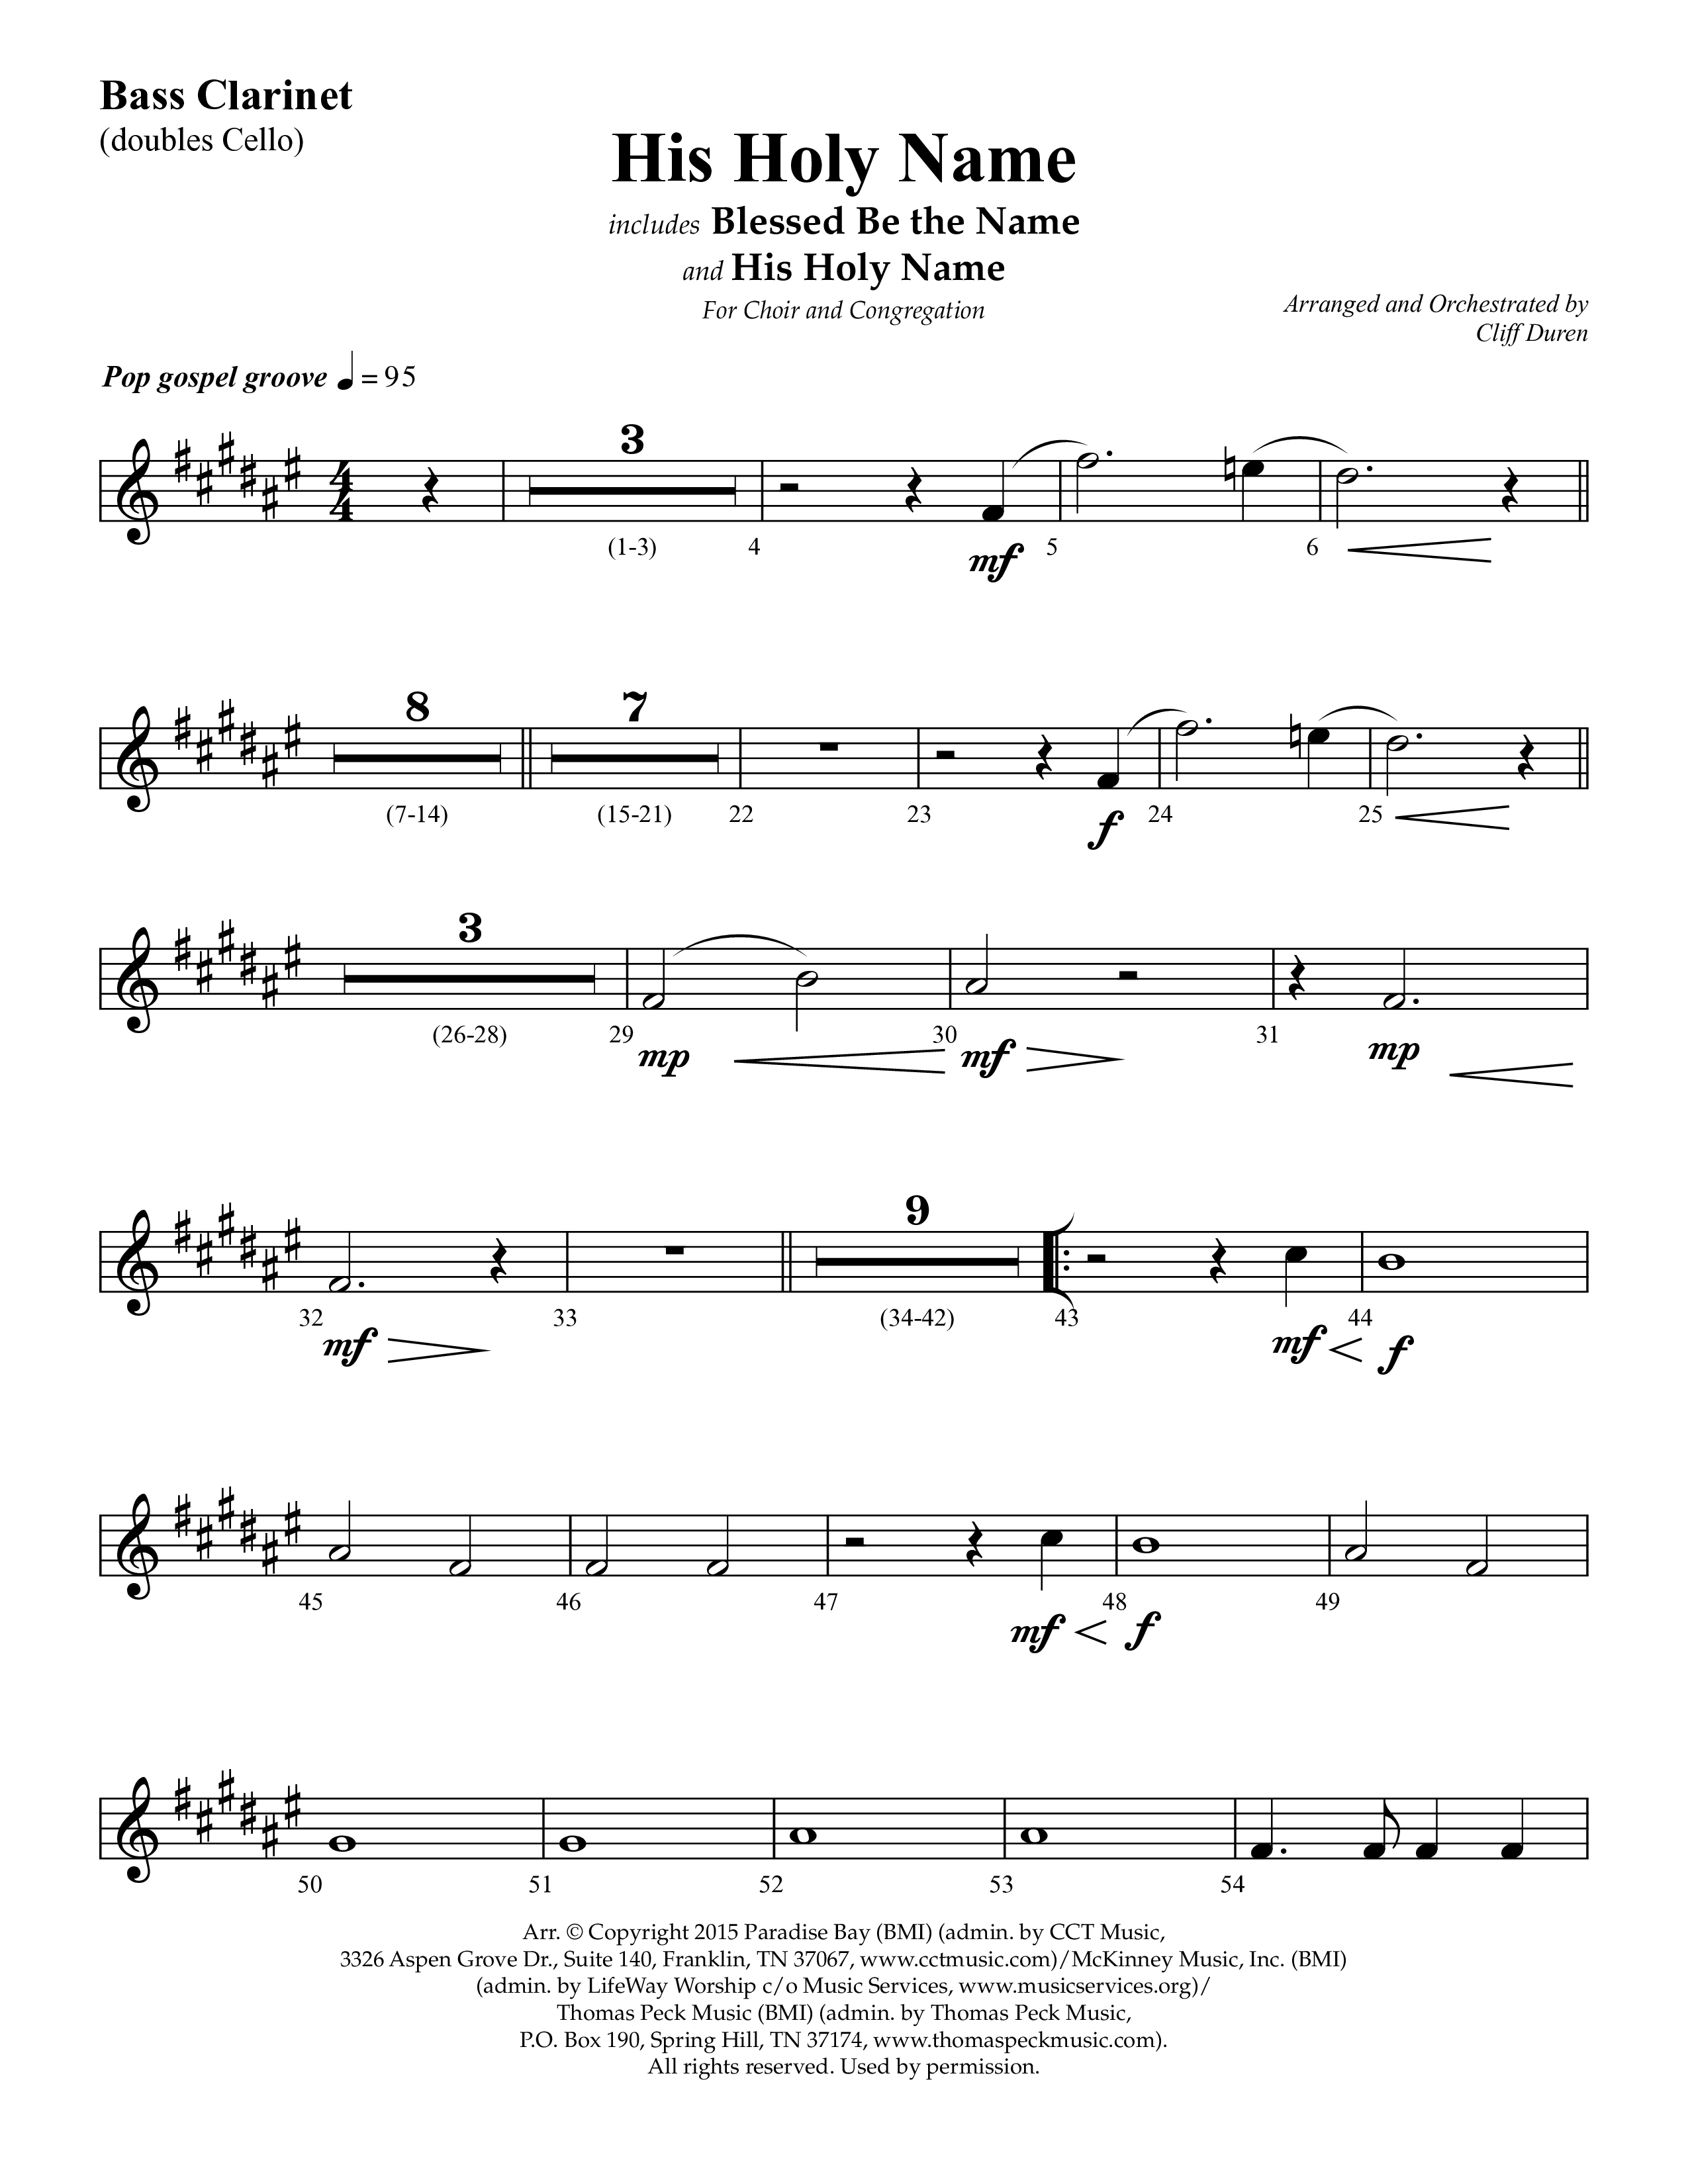 His Holy Name (with Blessed Be The Name) (Choral Anthem SATB) Bass Clarinet (Lifeway Choral / Arr. Cliff Duren)